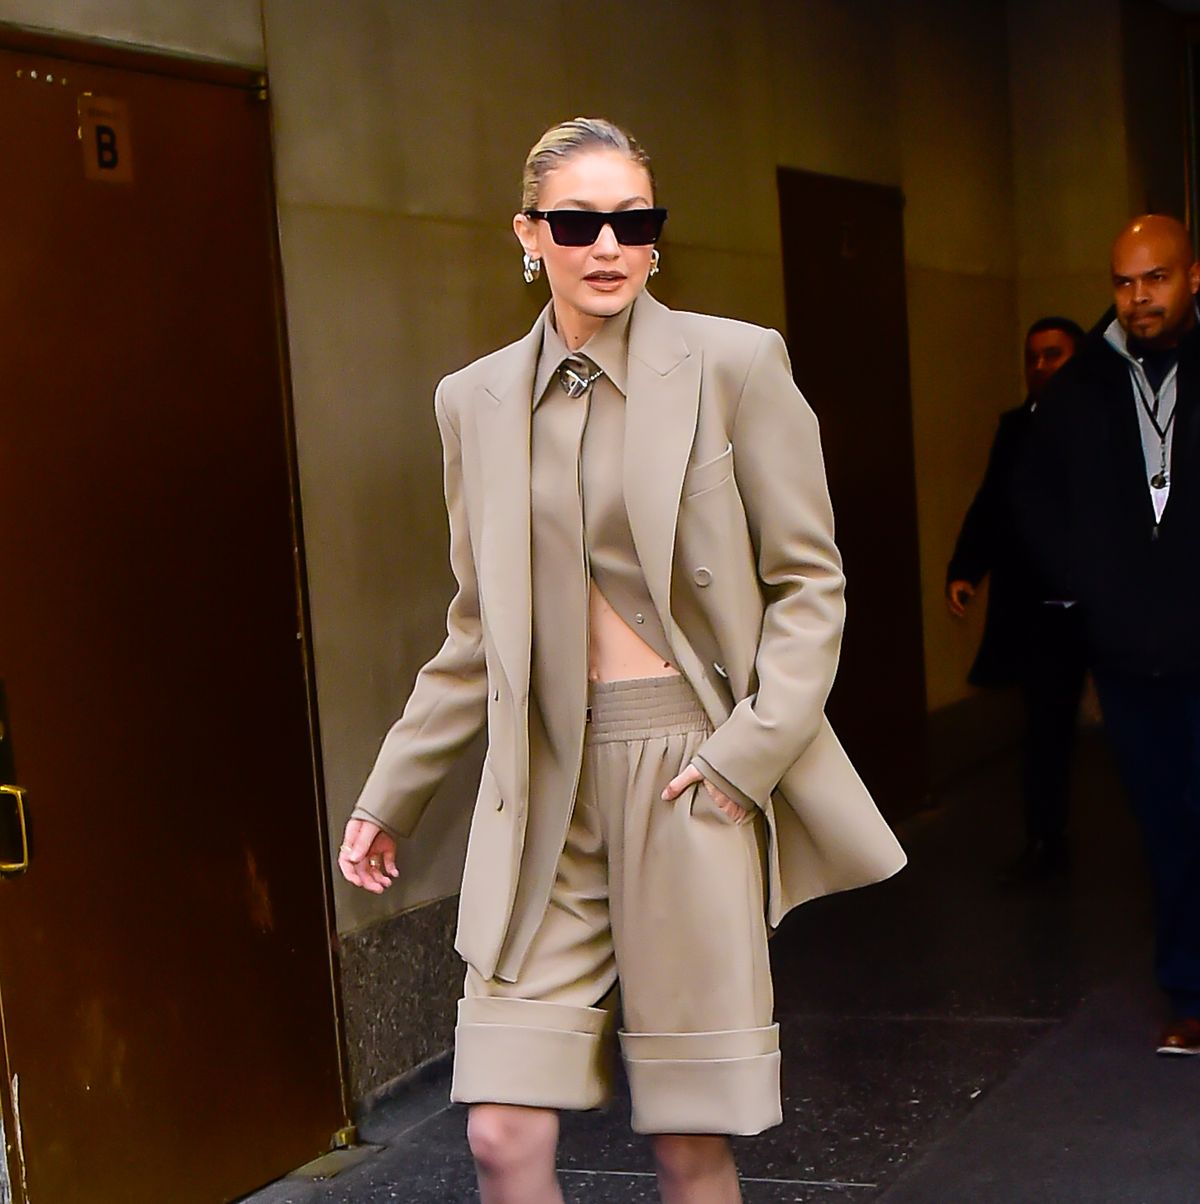 Gigi Hadid Wears Beige Suit - Shop Her Perfect Spring Outfit